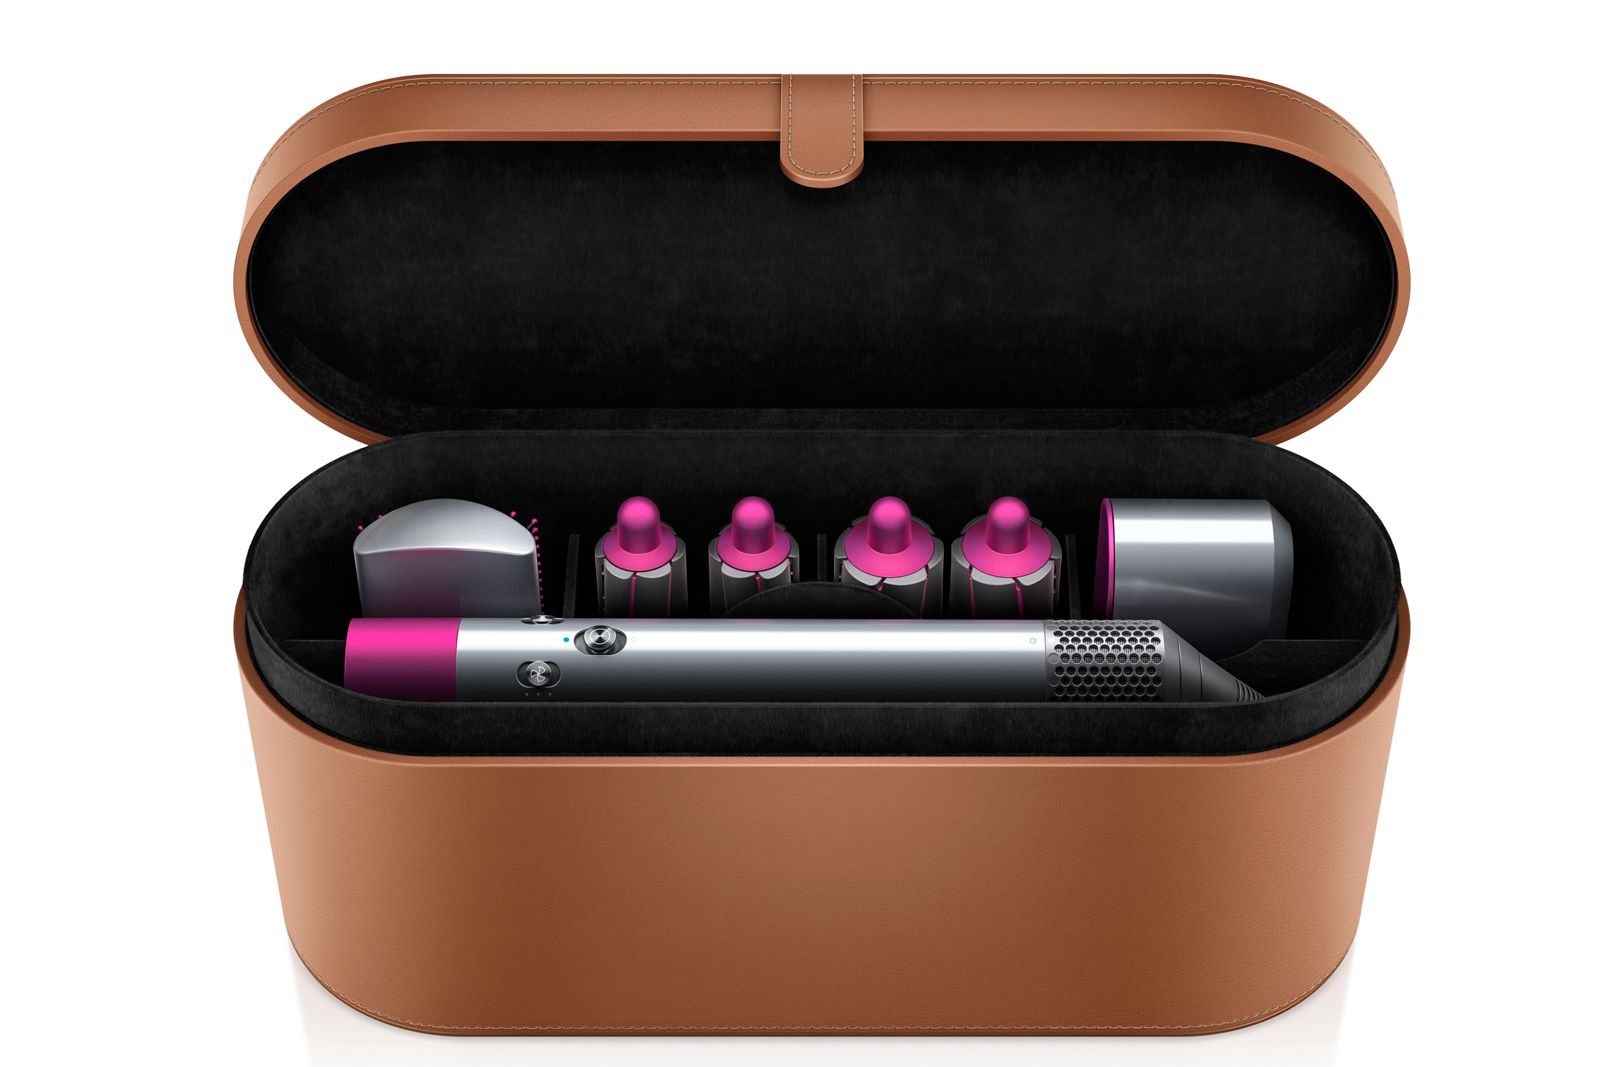 Dysons New Airwrap Super Styler Is A Styling Tool For Curls Waves And Blow Dries image 3